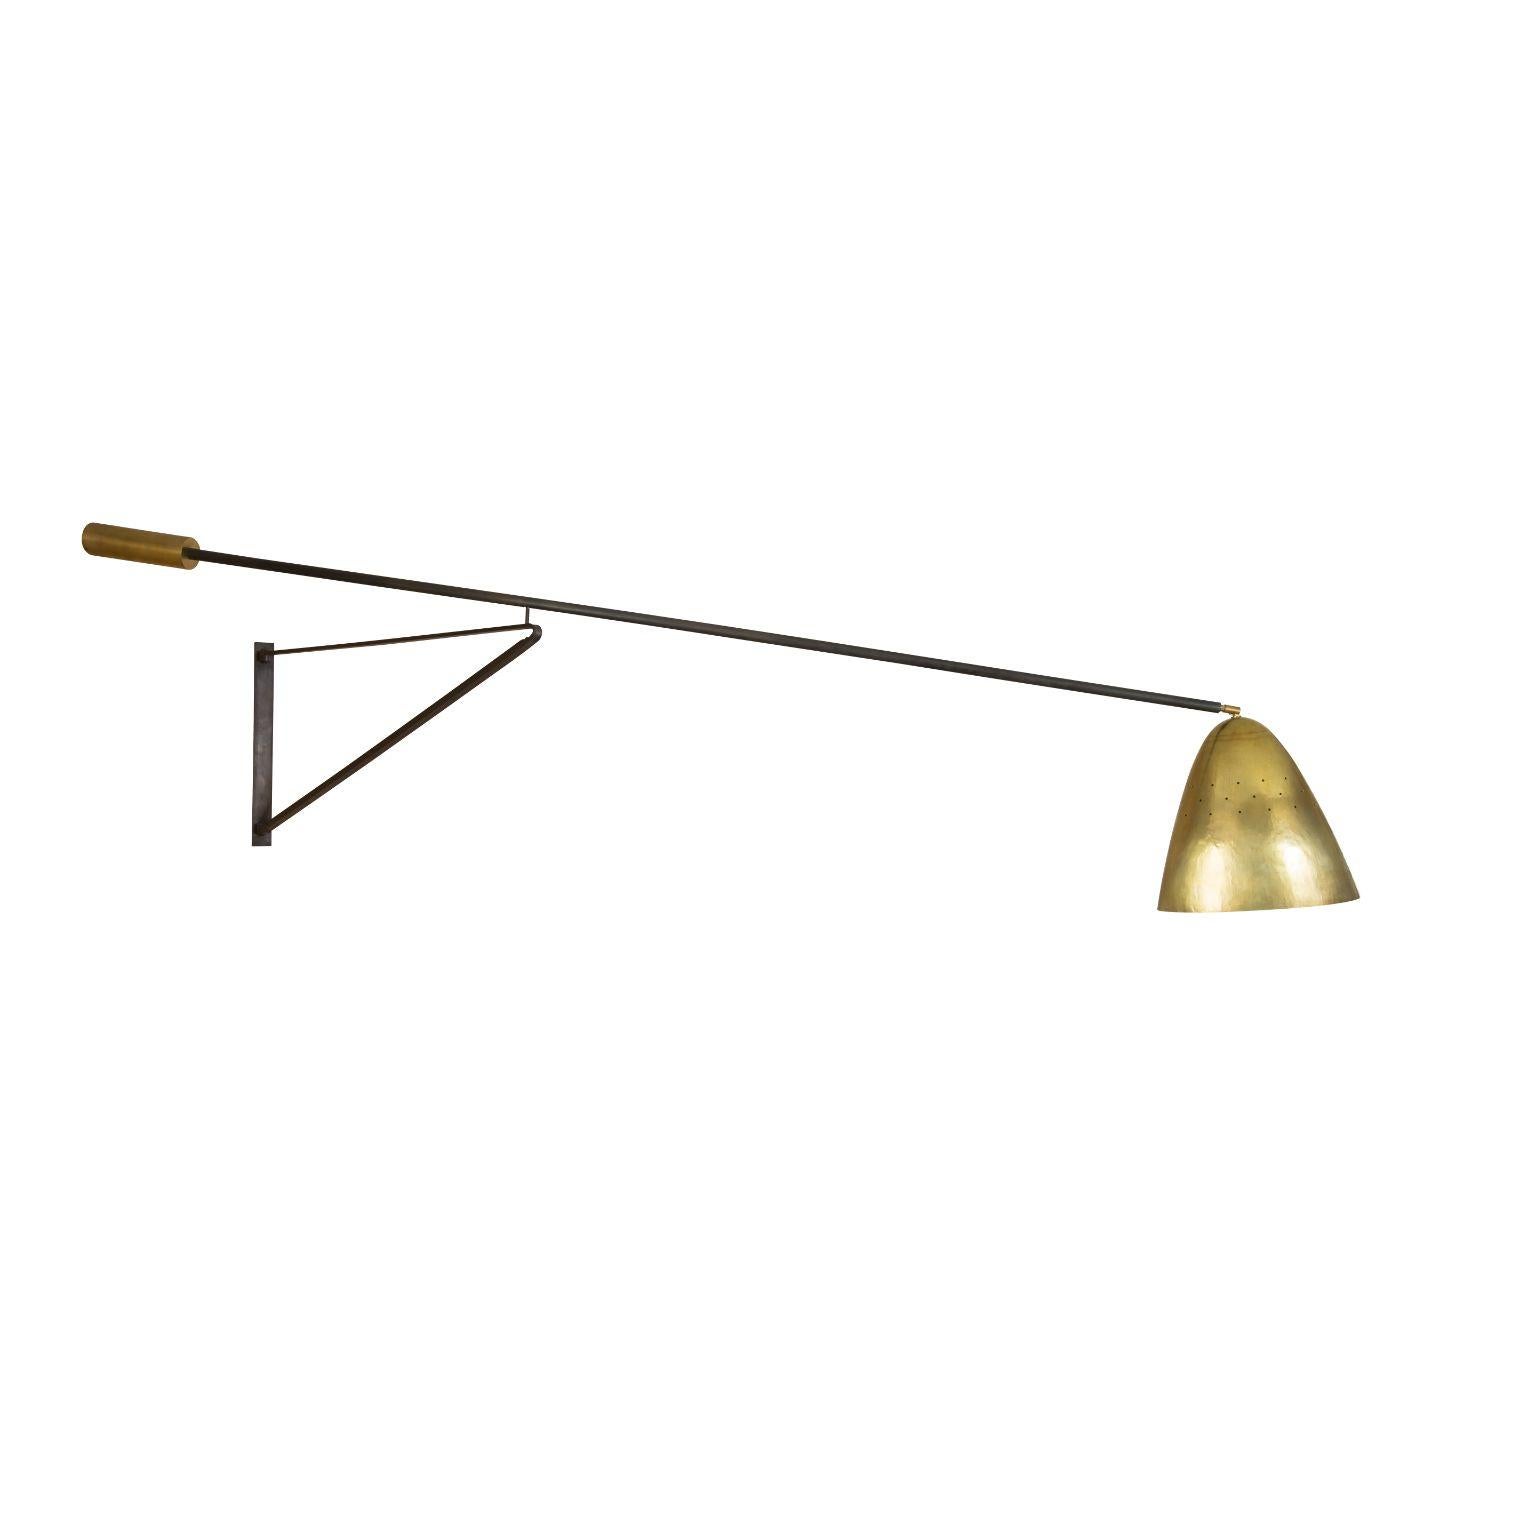 Demeter ceiling lamp by Emilie Lemardeley
Dimensions: D245 x W30 x H55 cm
Materials: Brass and steel
Weight: 10 kg
Also Available in different dimensions.

The Demeter lighting refers to the nutritive earth goodess. This goddness told to the